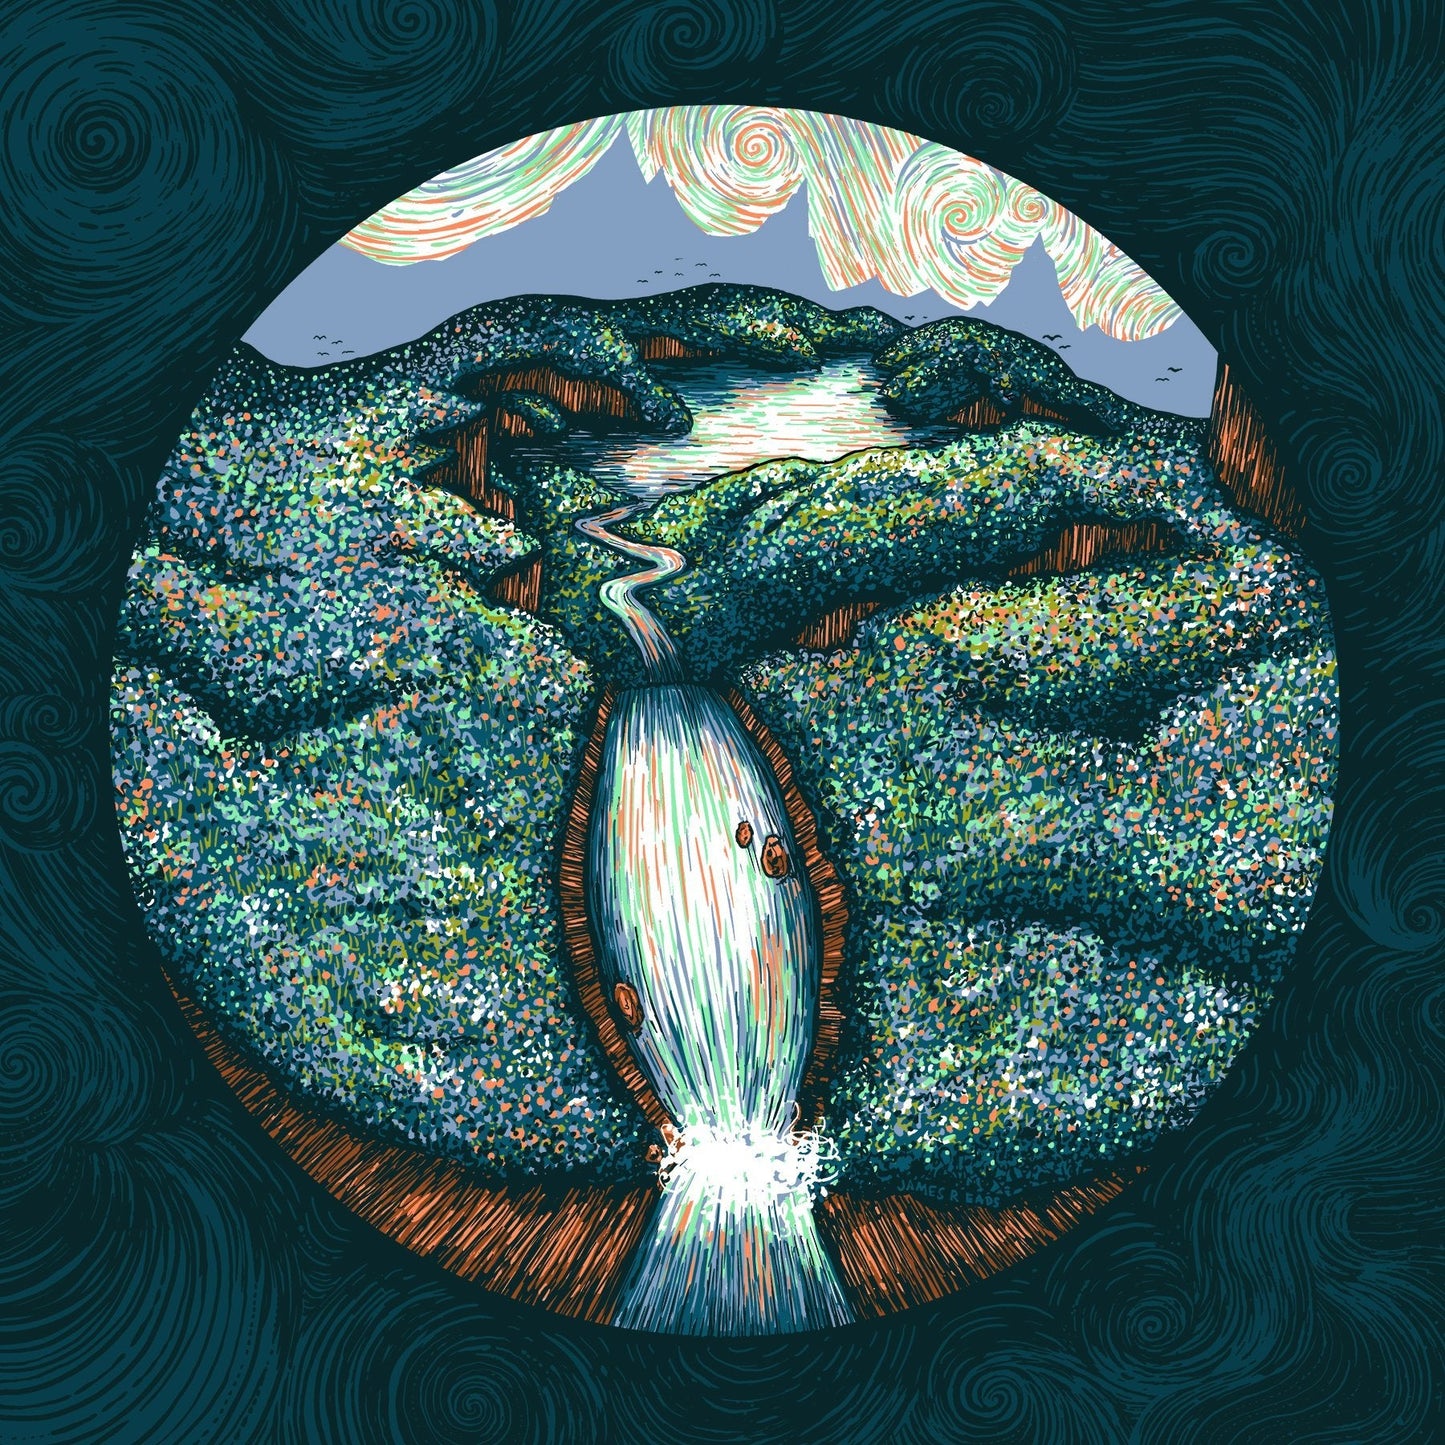 Flower Valley (Available at Posters 4 People) James R. Eads